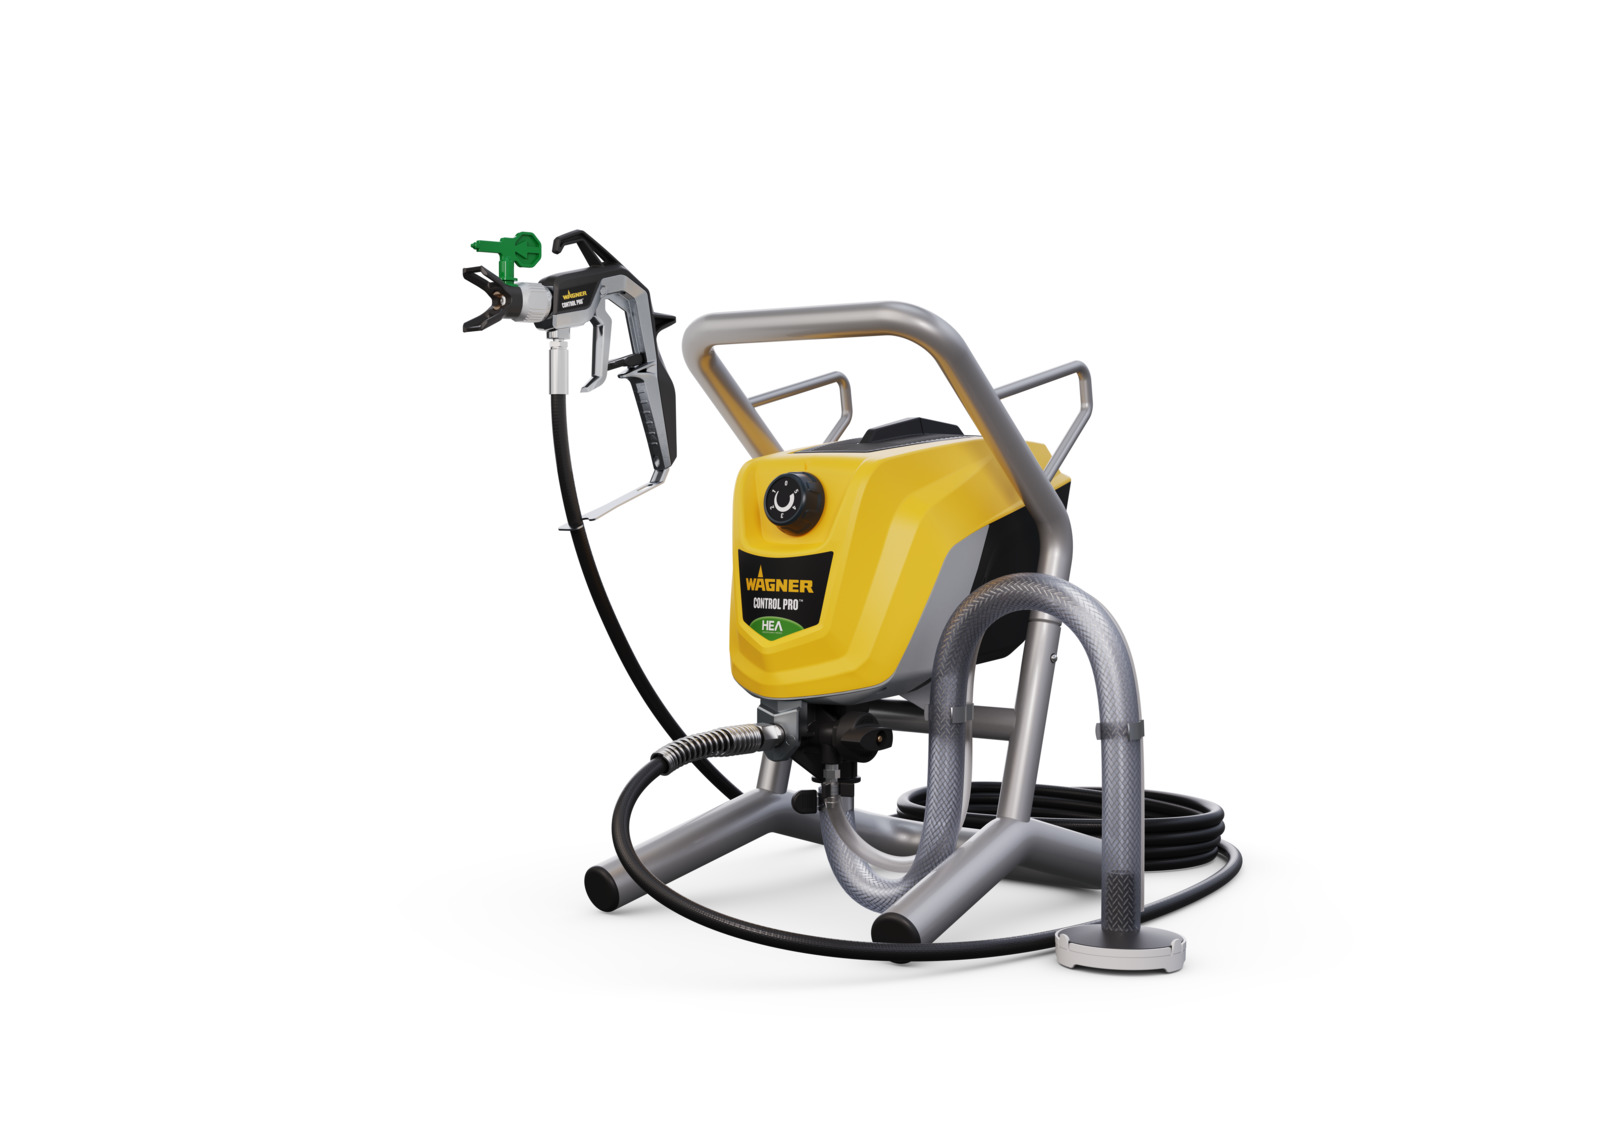 control-pro-250r-airless-paint-sprayer-painting